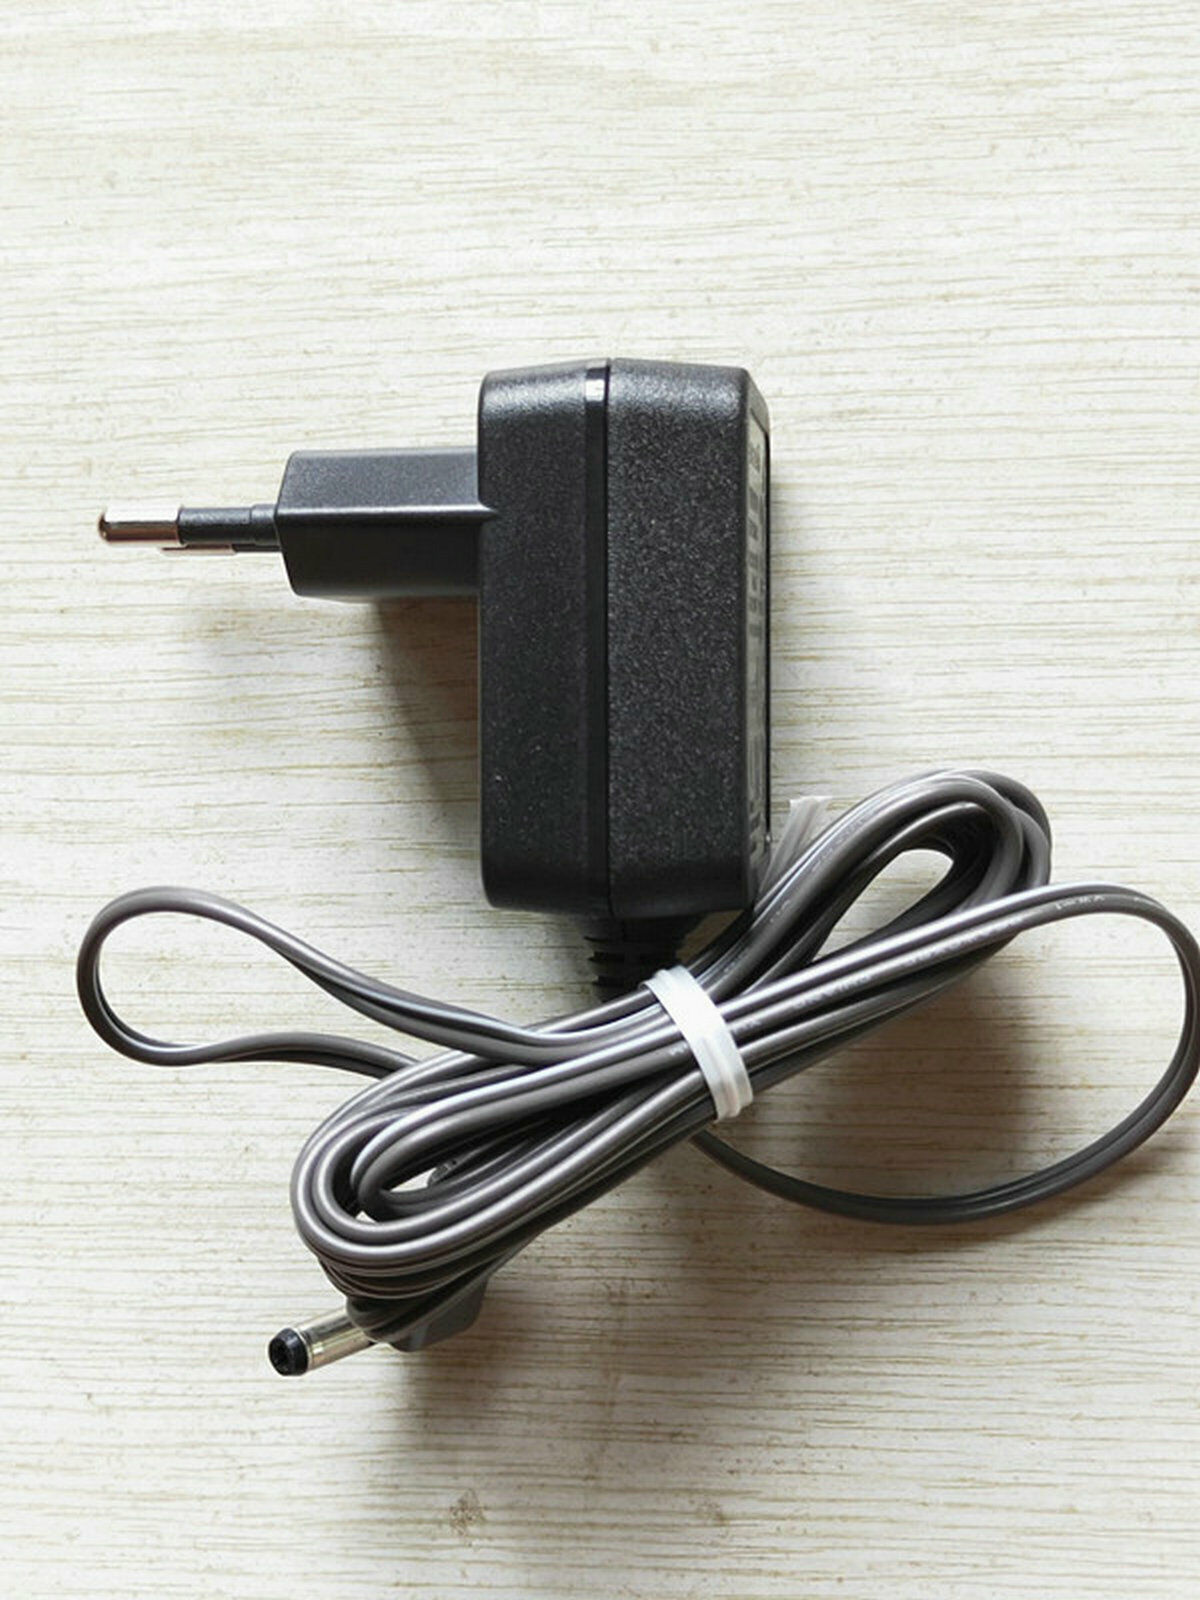 *Brand NEW* Bluzen HP-669 7.4V Percussion Massager Massage Gun Power Charger AC Adapter - Click Image to Close